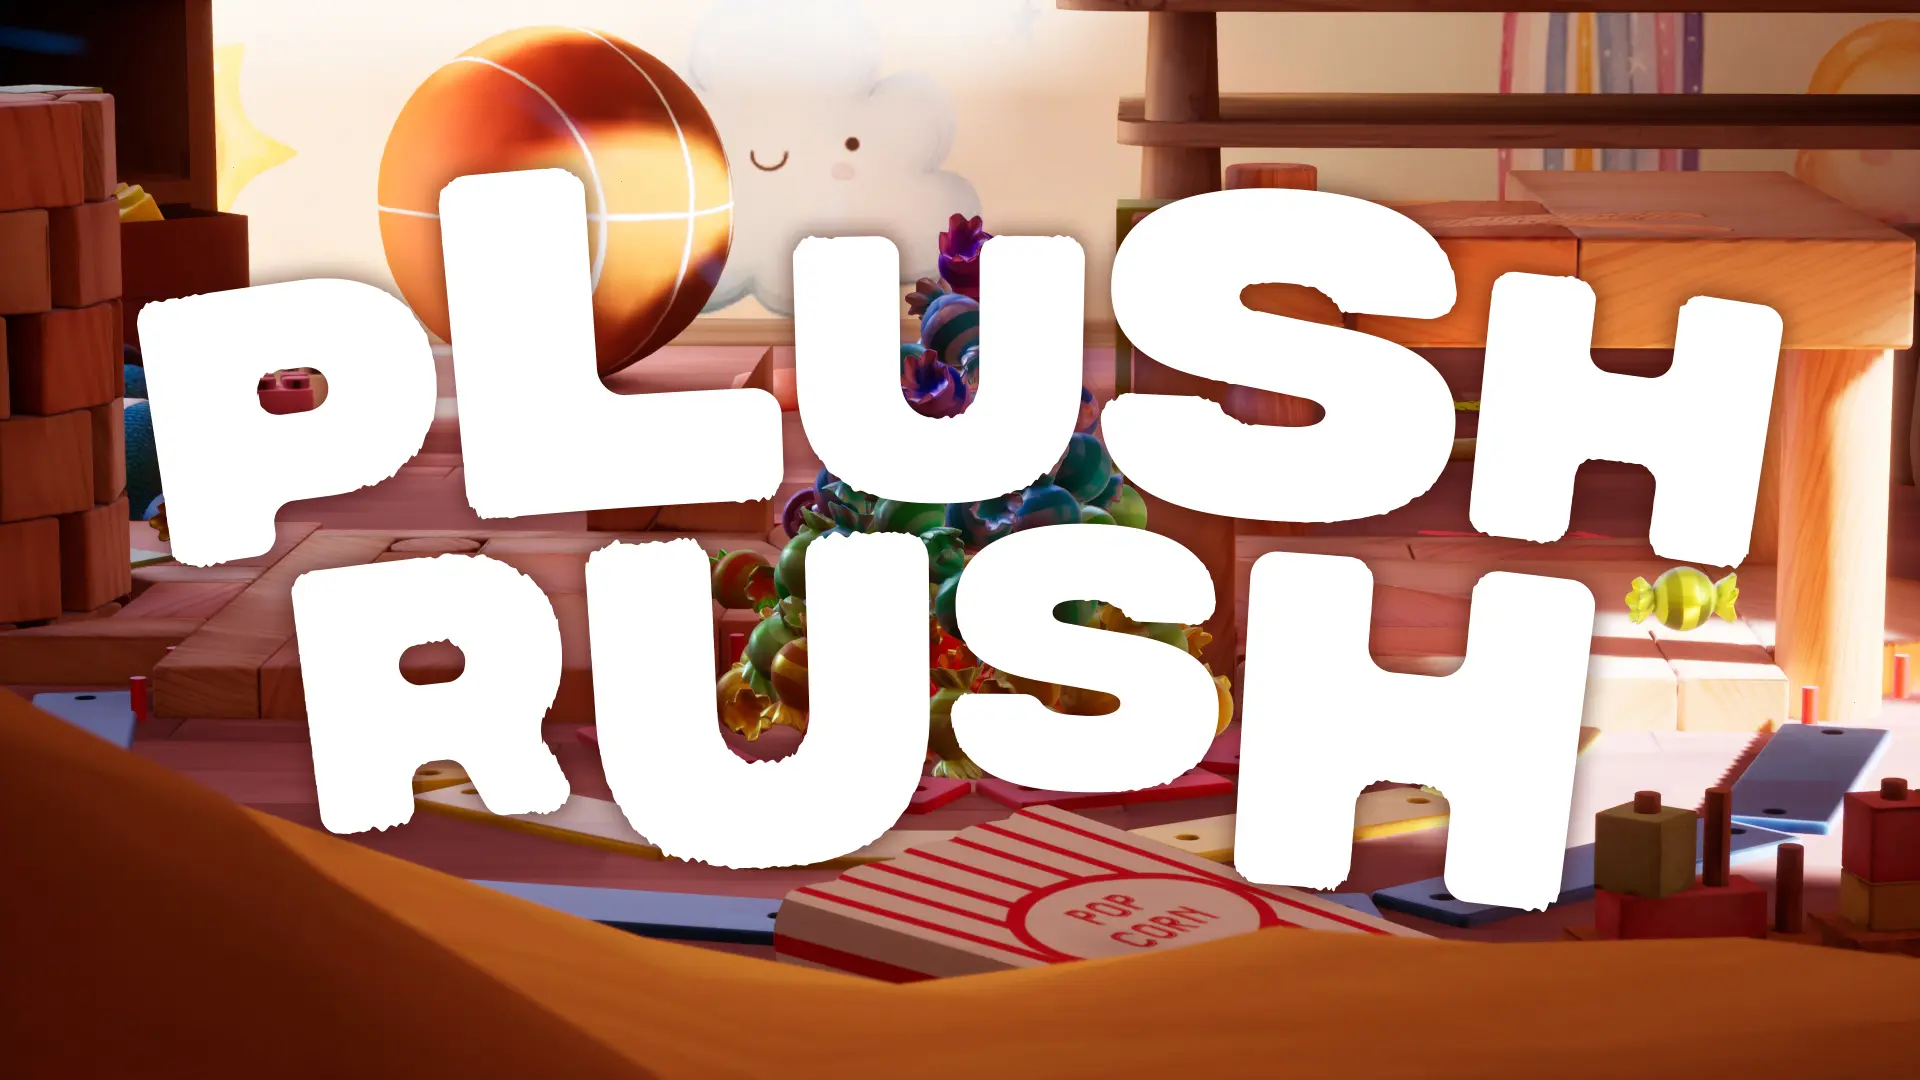 Step into the vibrant world of 'Plush Rush', a captivating VR adventure that's perfect for ages 5 to 85! Dive deep into a realm where guardian toys become heroes, and up to 8 players join forces to shield their cherished trove of sweets from audacious toy trespassers. Face daring challengers and crafty opponents determined to seize your candy treasures. From the soft fur of the plush protectors to the glint of candy wrappers, every detail is rendered to immerse you in this enchanting universe. A delightful mix of strategy, teamwork, and rapid reflexes is required, ensuring every game session is an exhilarating experience. Suitable for players of all ages, 'Plush Rush' is the ultimate fantasy adventure, promising heart-pounding action, delightful visuals, and the sweet taste of victory. Will you rise to the challenge and defend the candy kingdom?